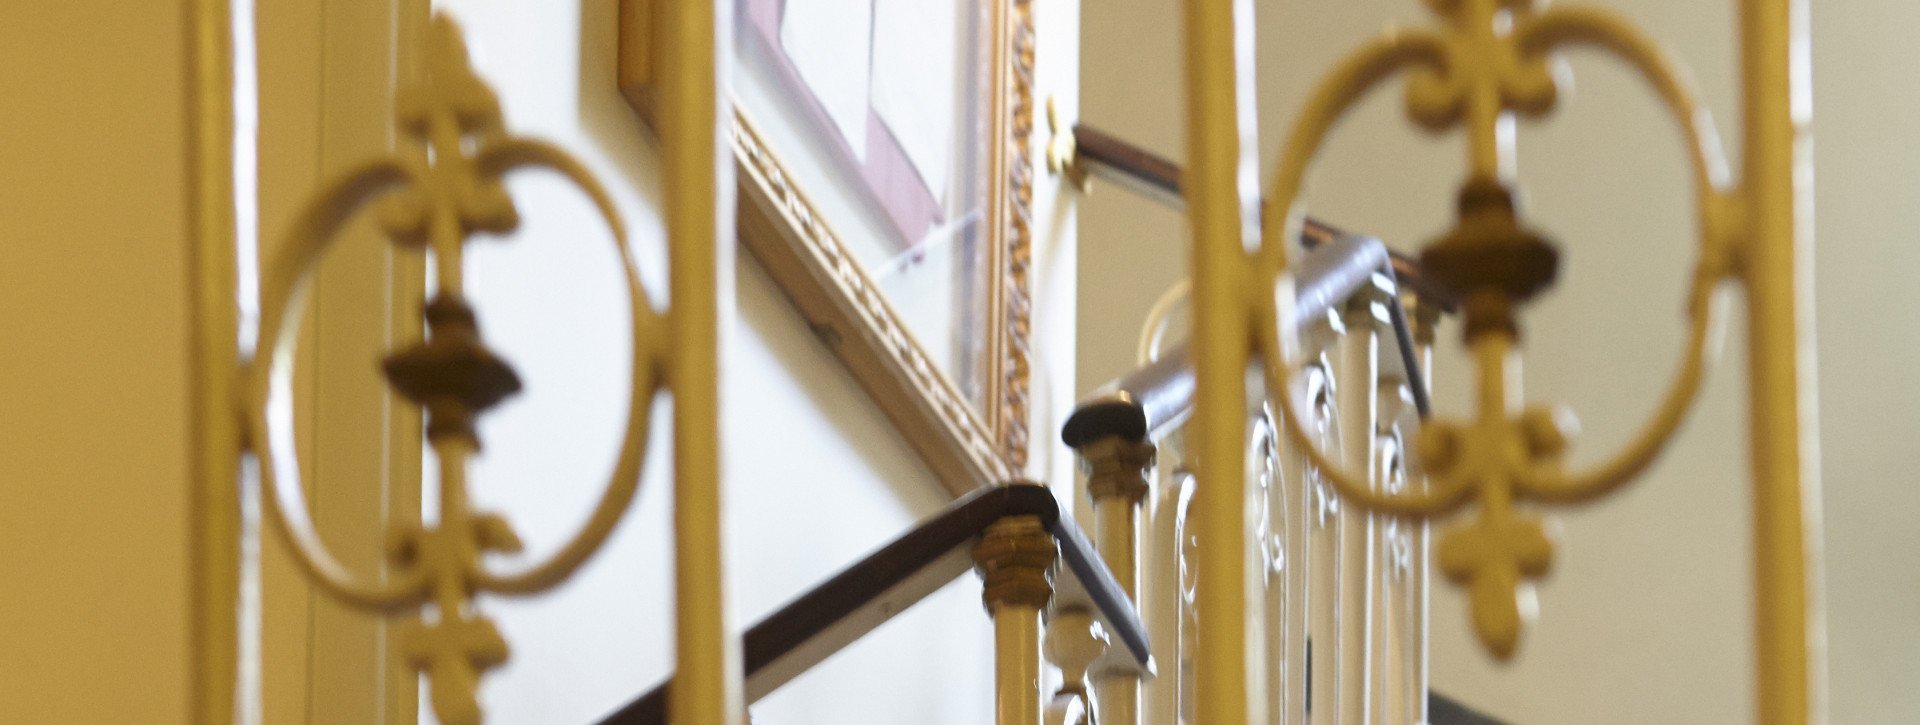 Golden stairwell in International au Lac Historic Lakeside Hotel